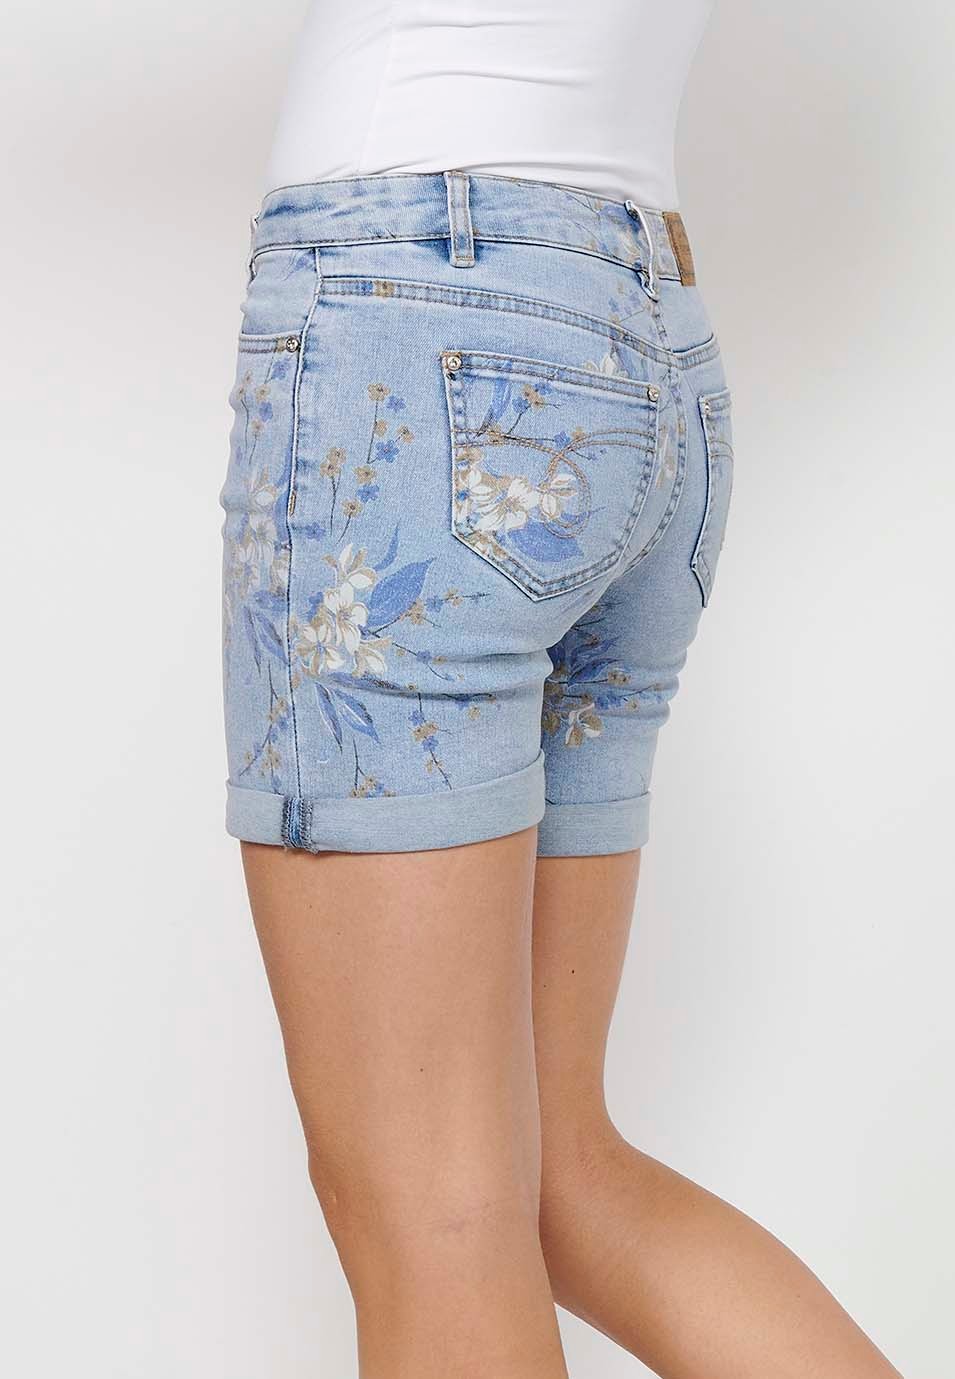 Shorts with a turn-up finish with zipper and button closure with a Blue floral print for Women 6